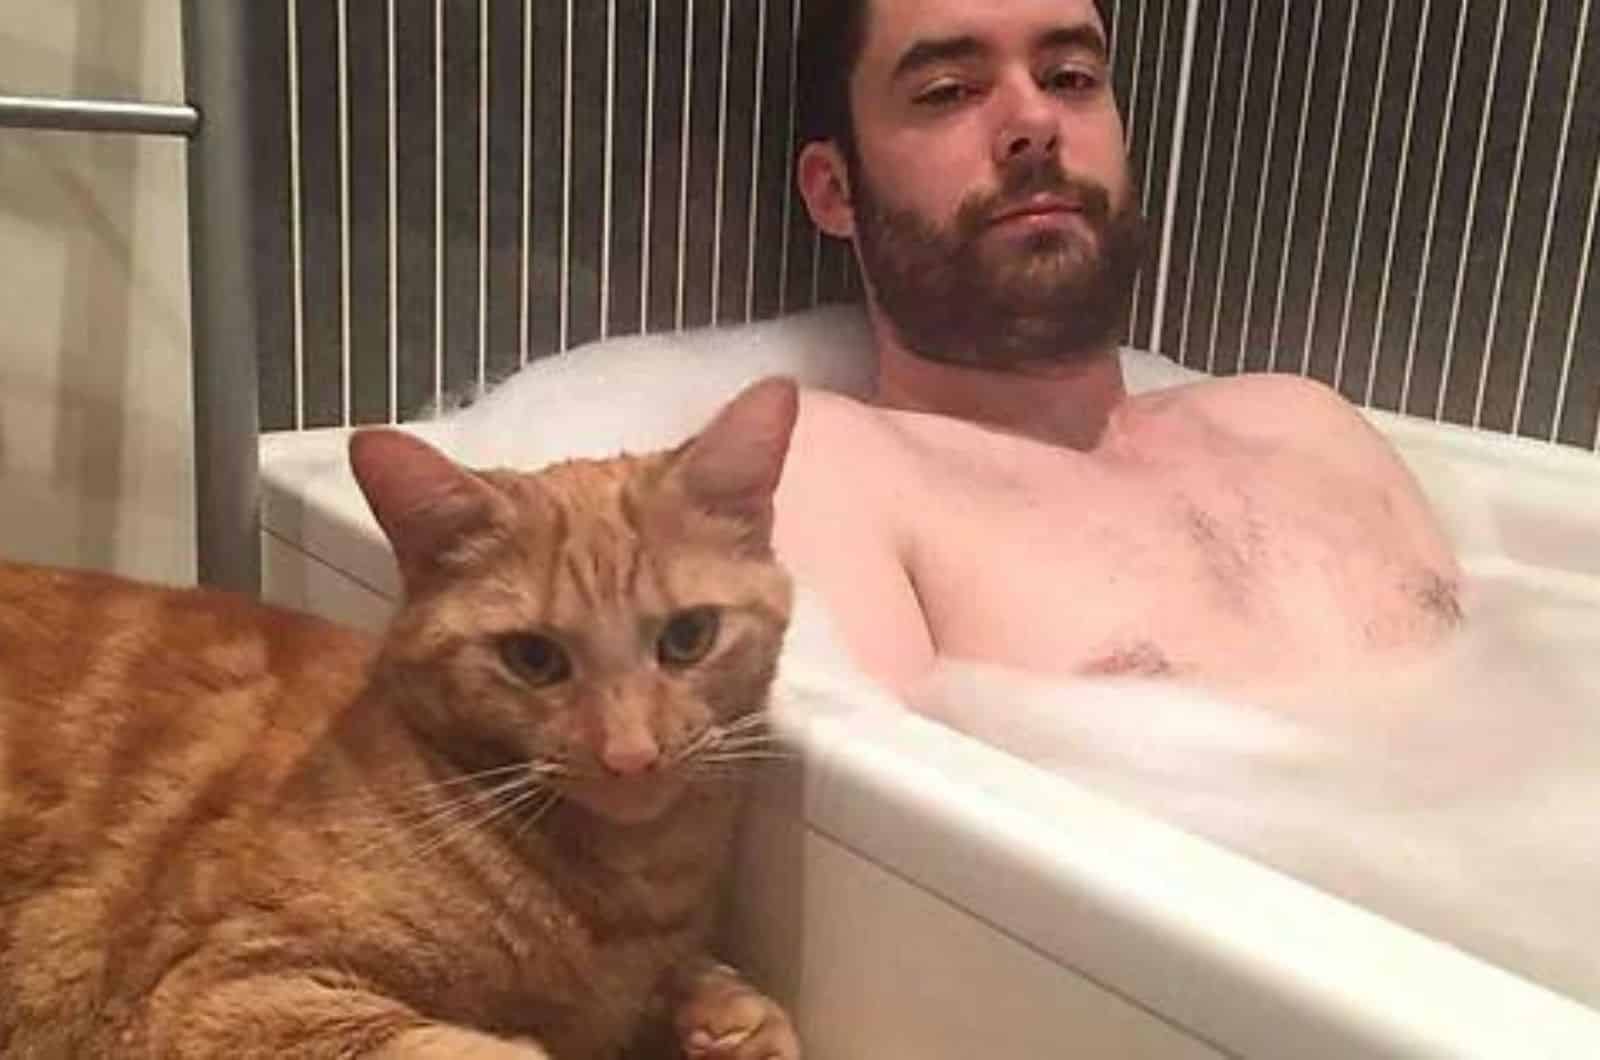 man taking a bath with cat next to him